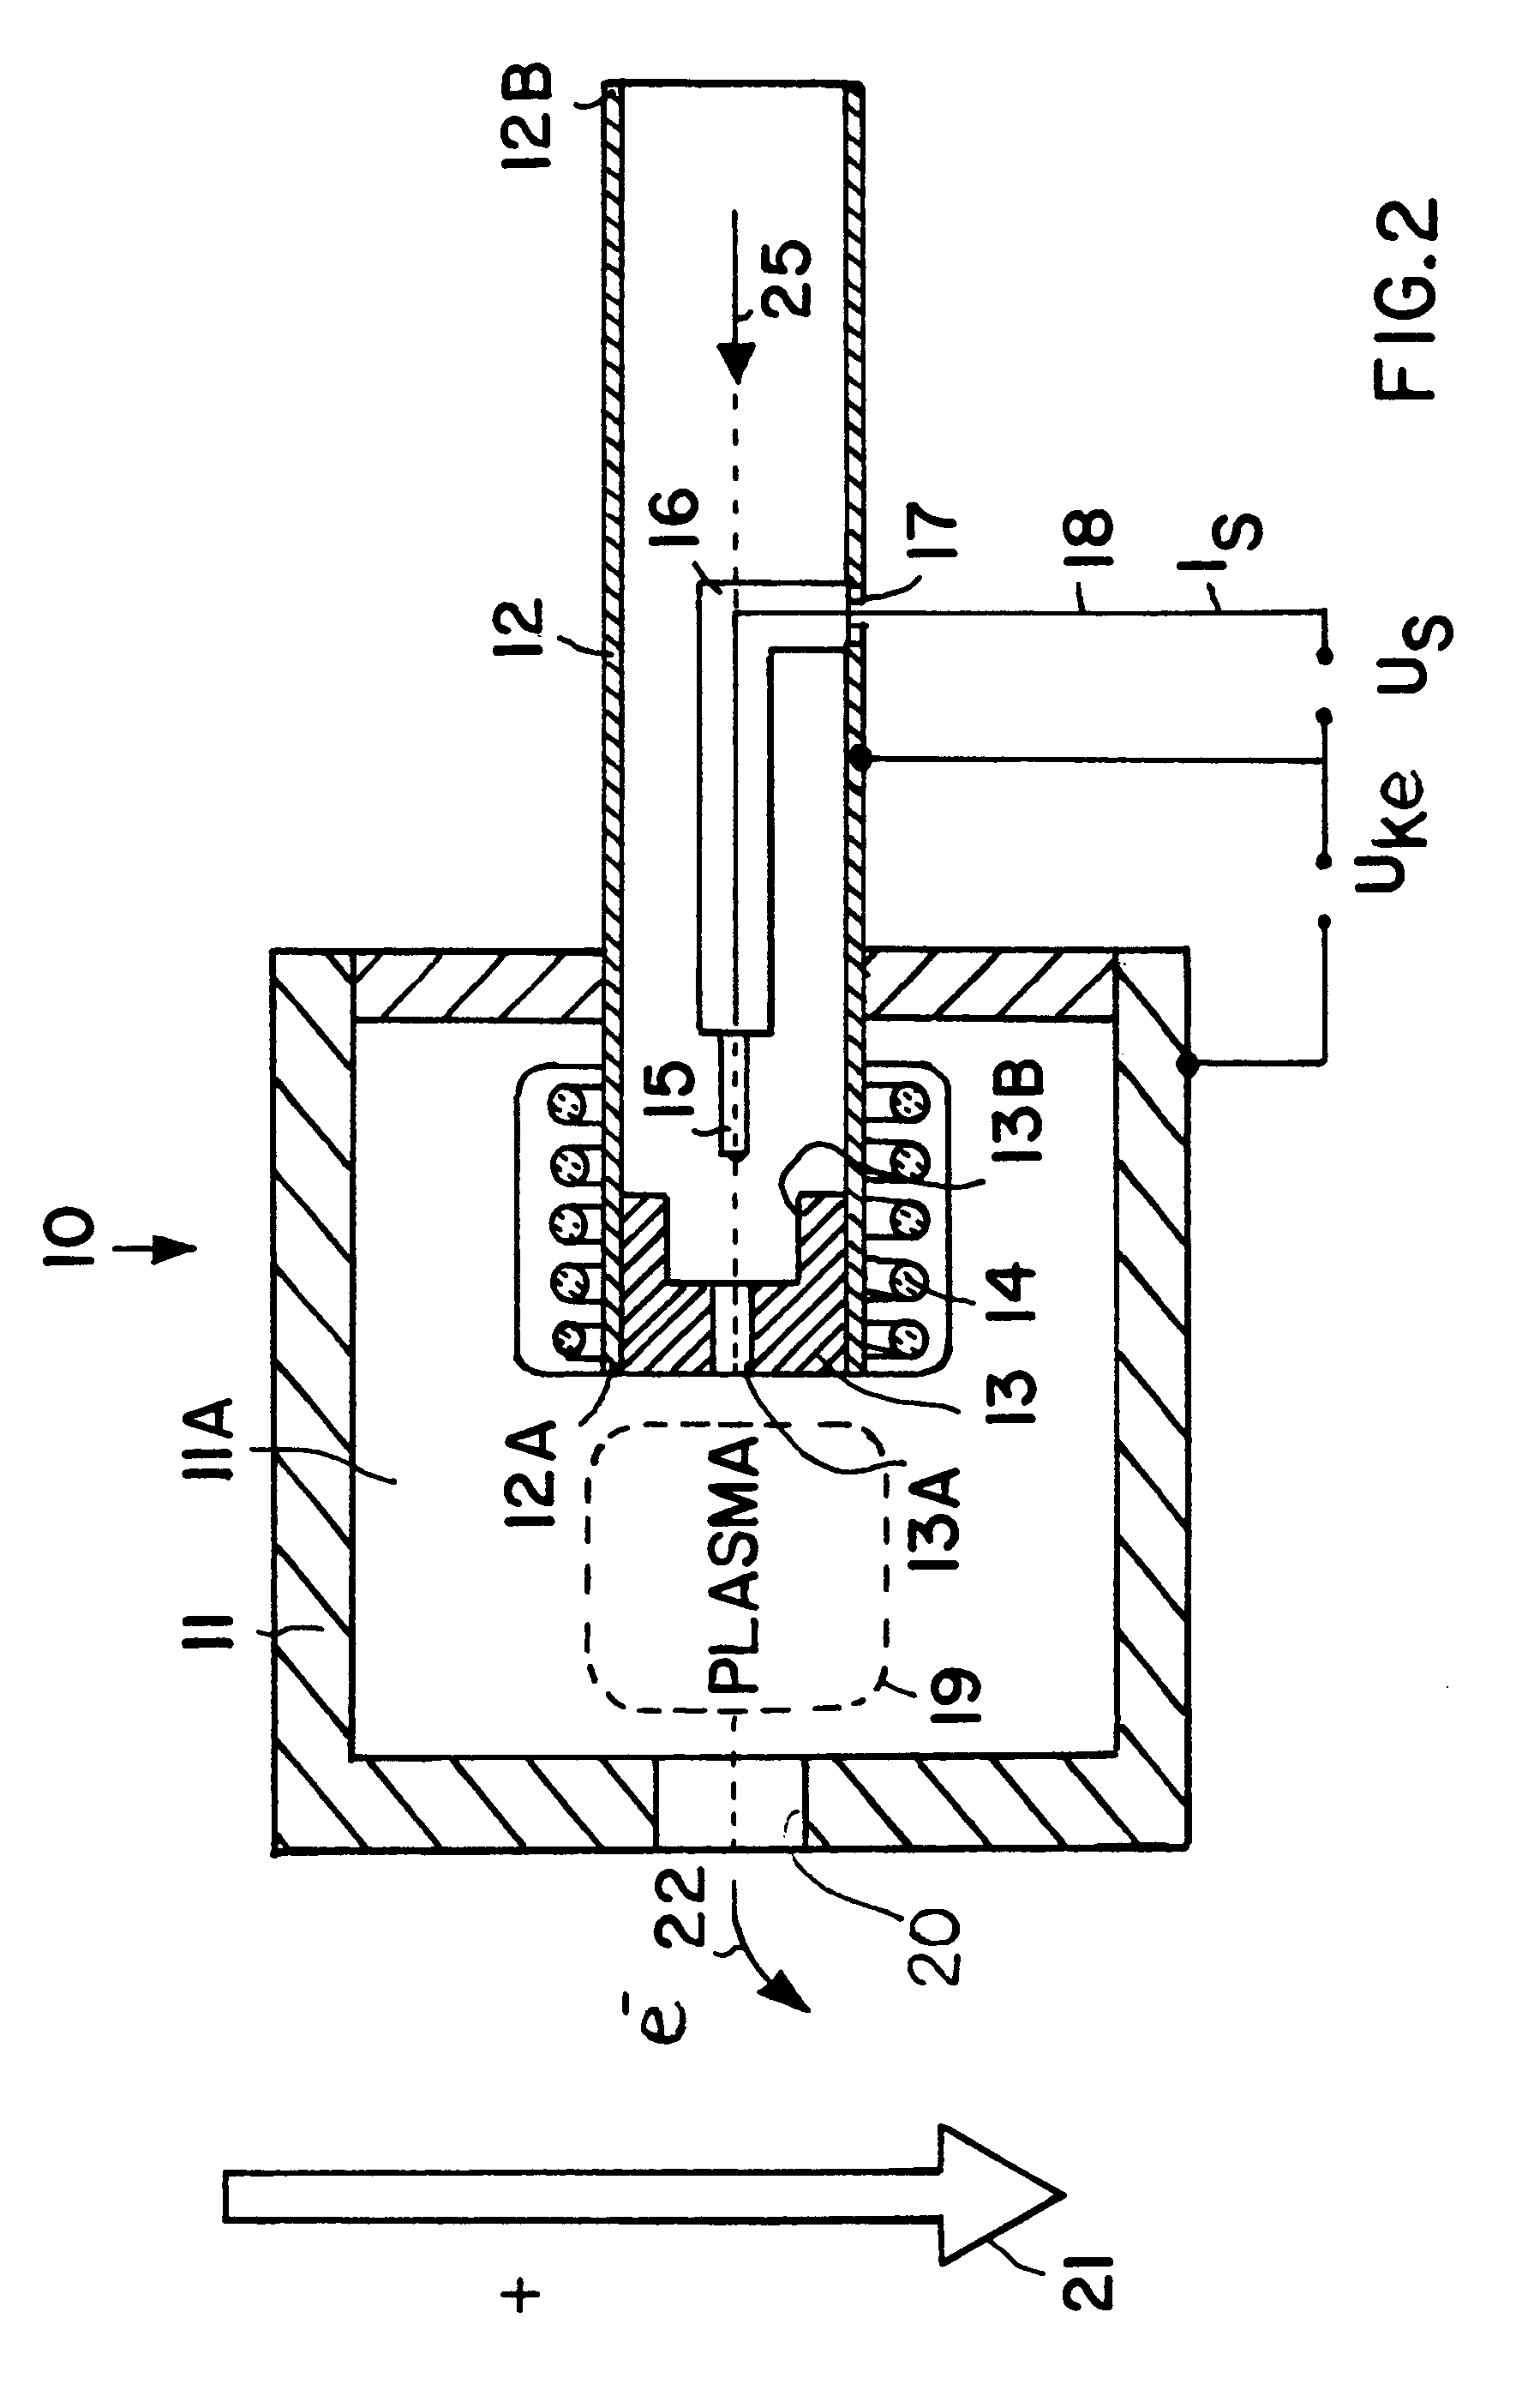 Electrostatic propulsion engine with neutralizing ion source